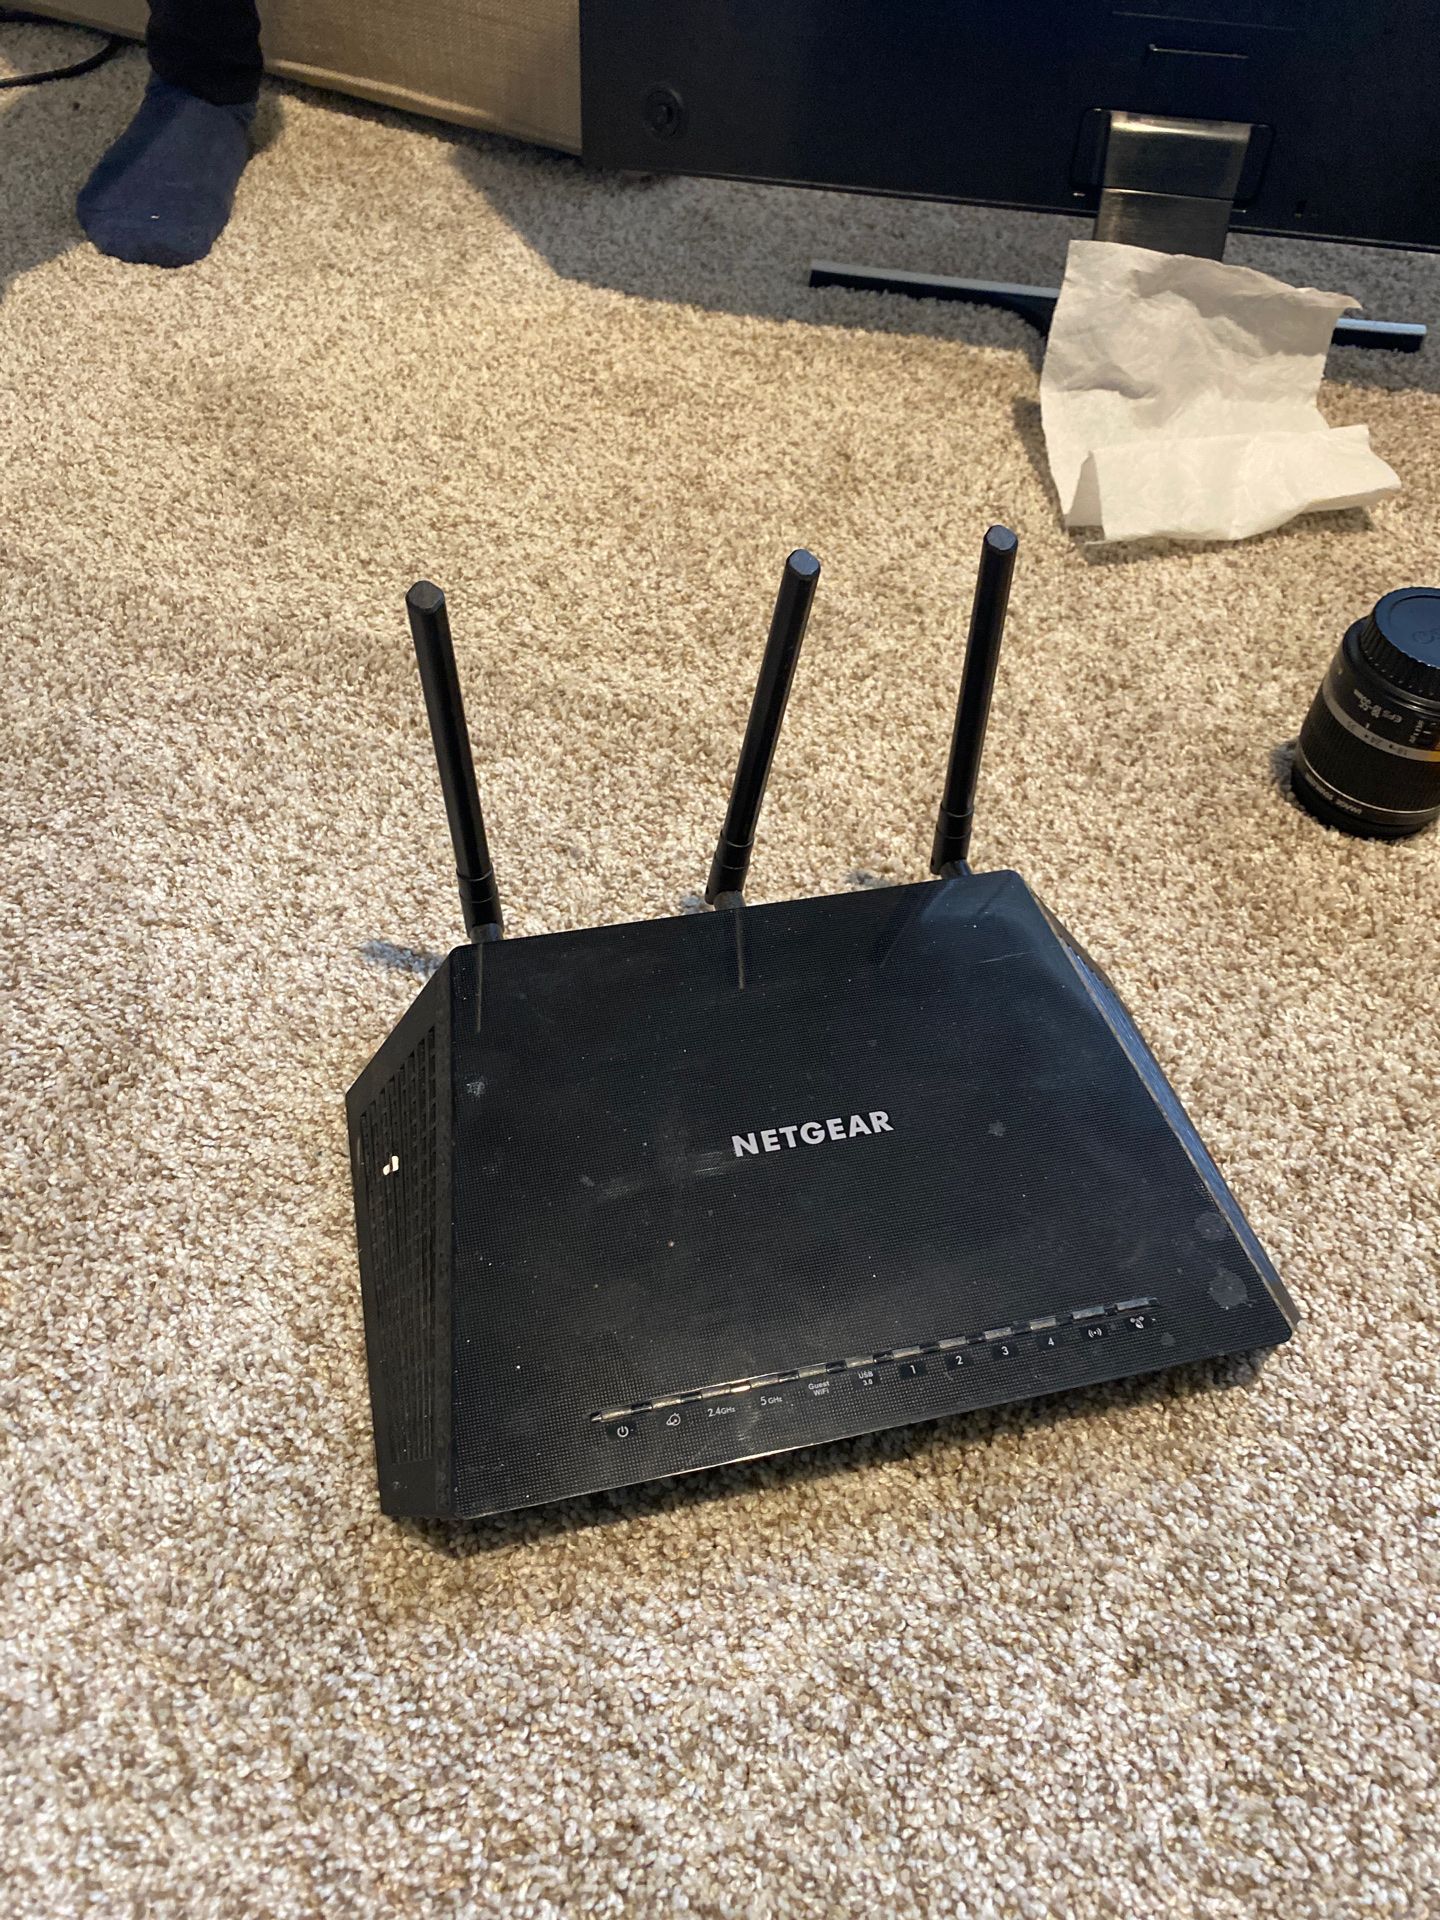 Nighthawk router for sale